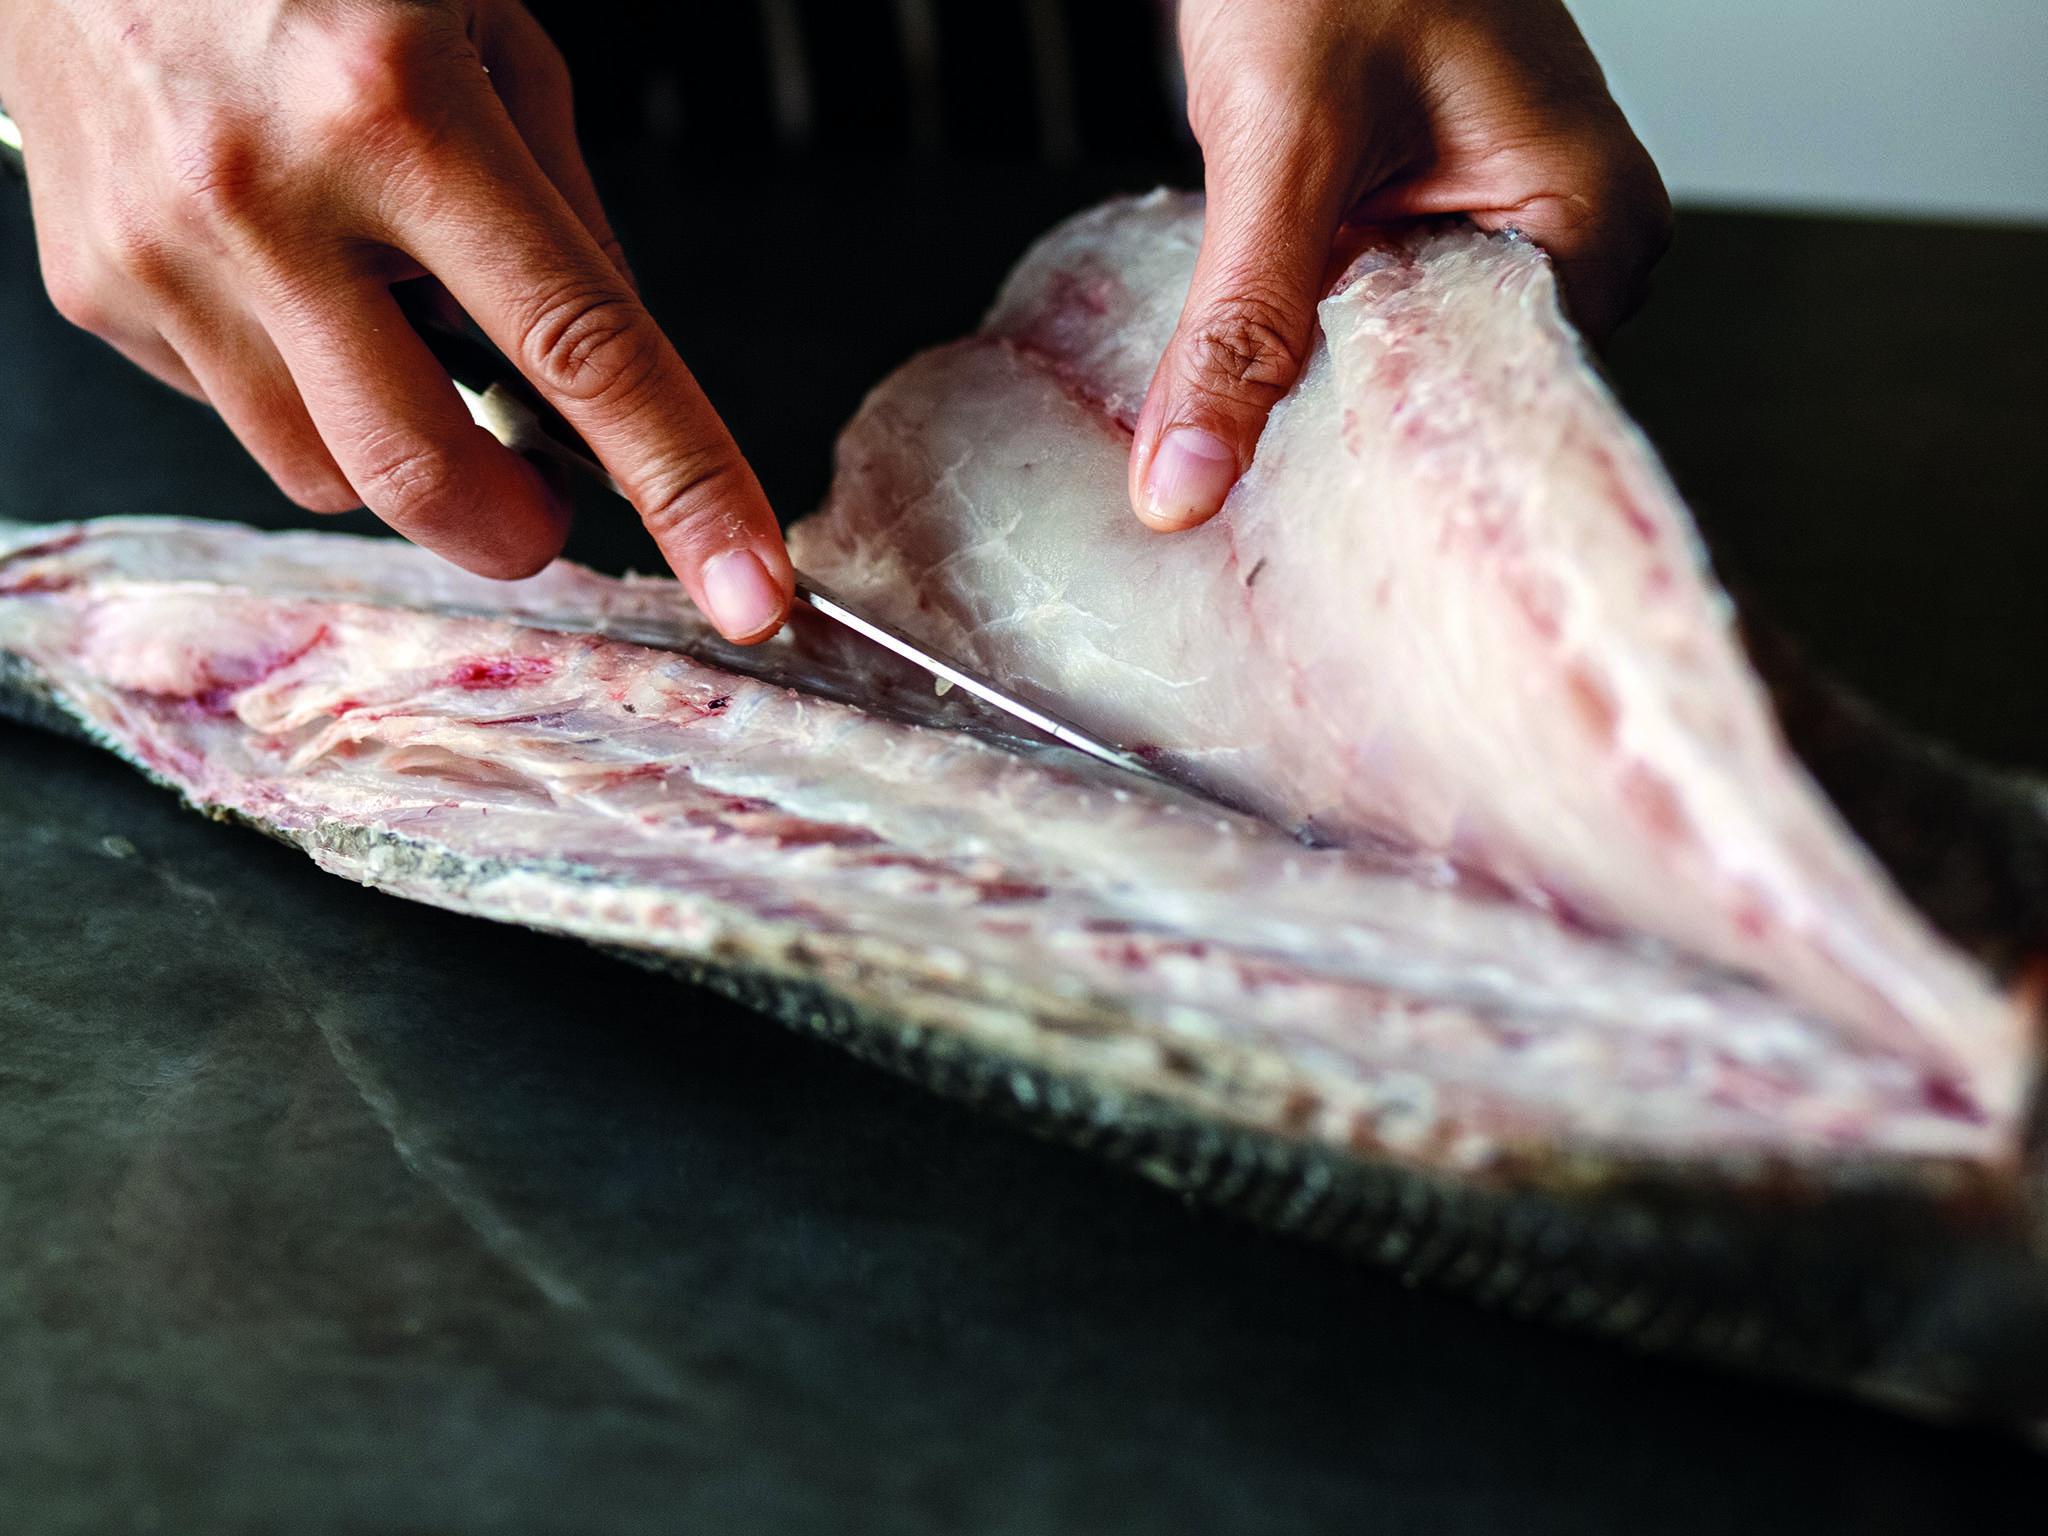 5. Open the incision and run the knife against the bones of the fish to start to separate the fillet from the rest of the fish. Keep the knife as close as possible to the bones so as not to waste any of the fillet